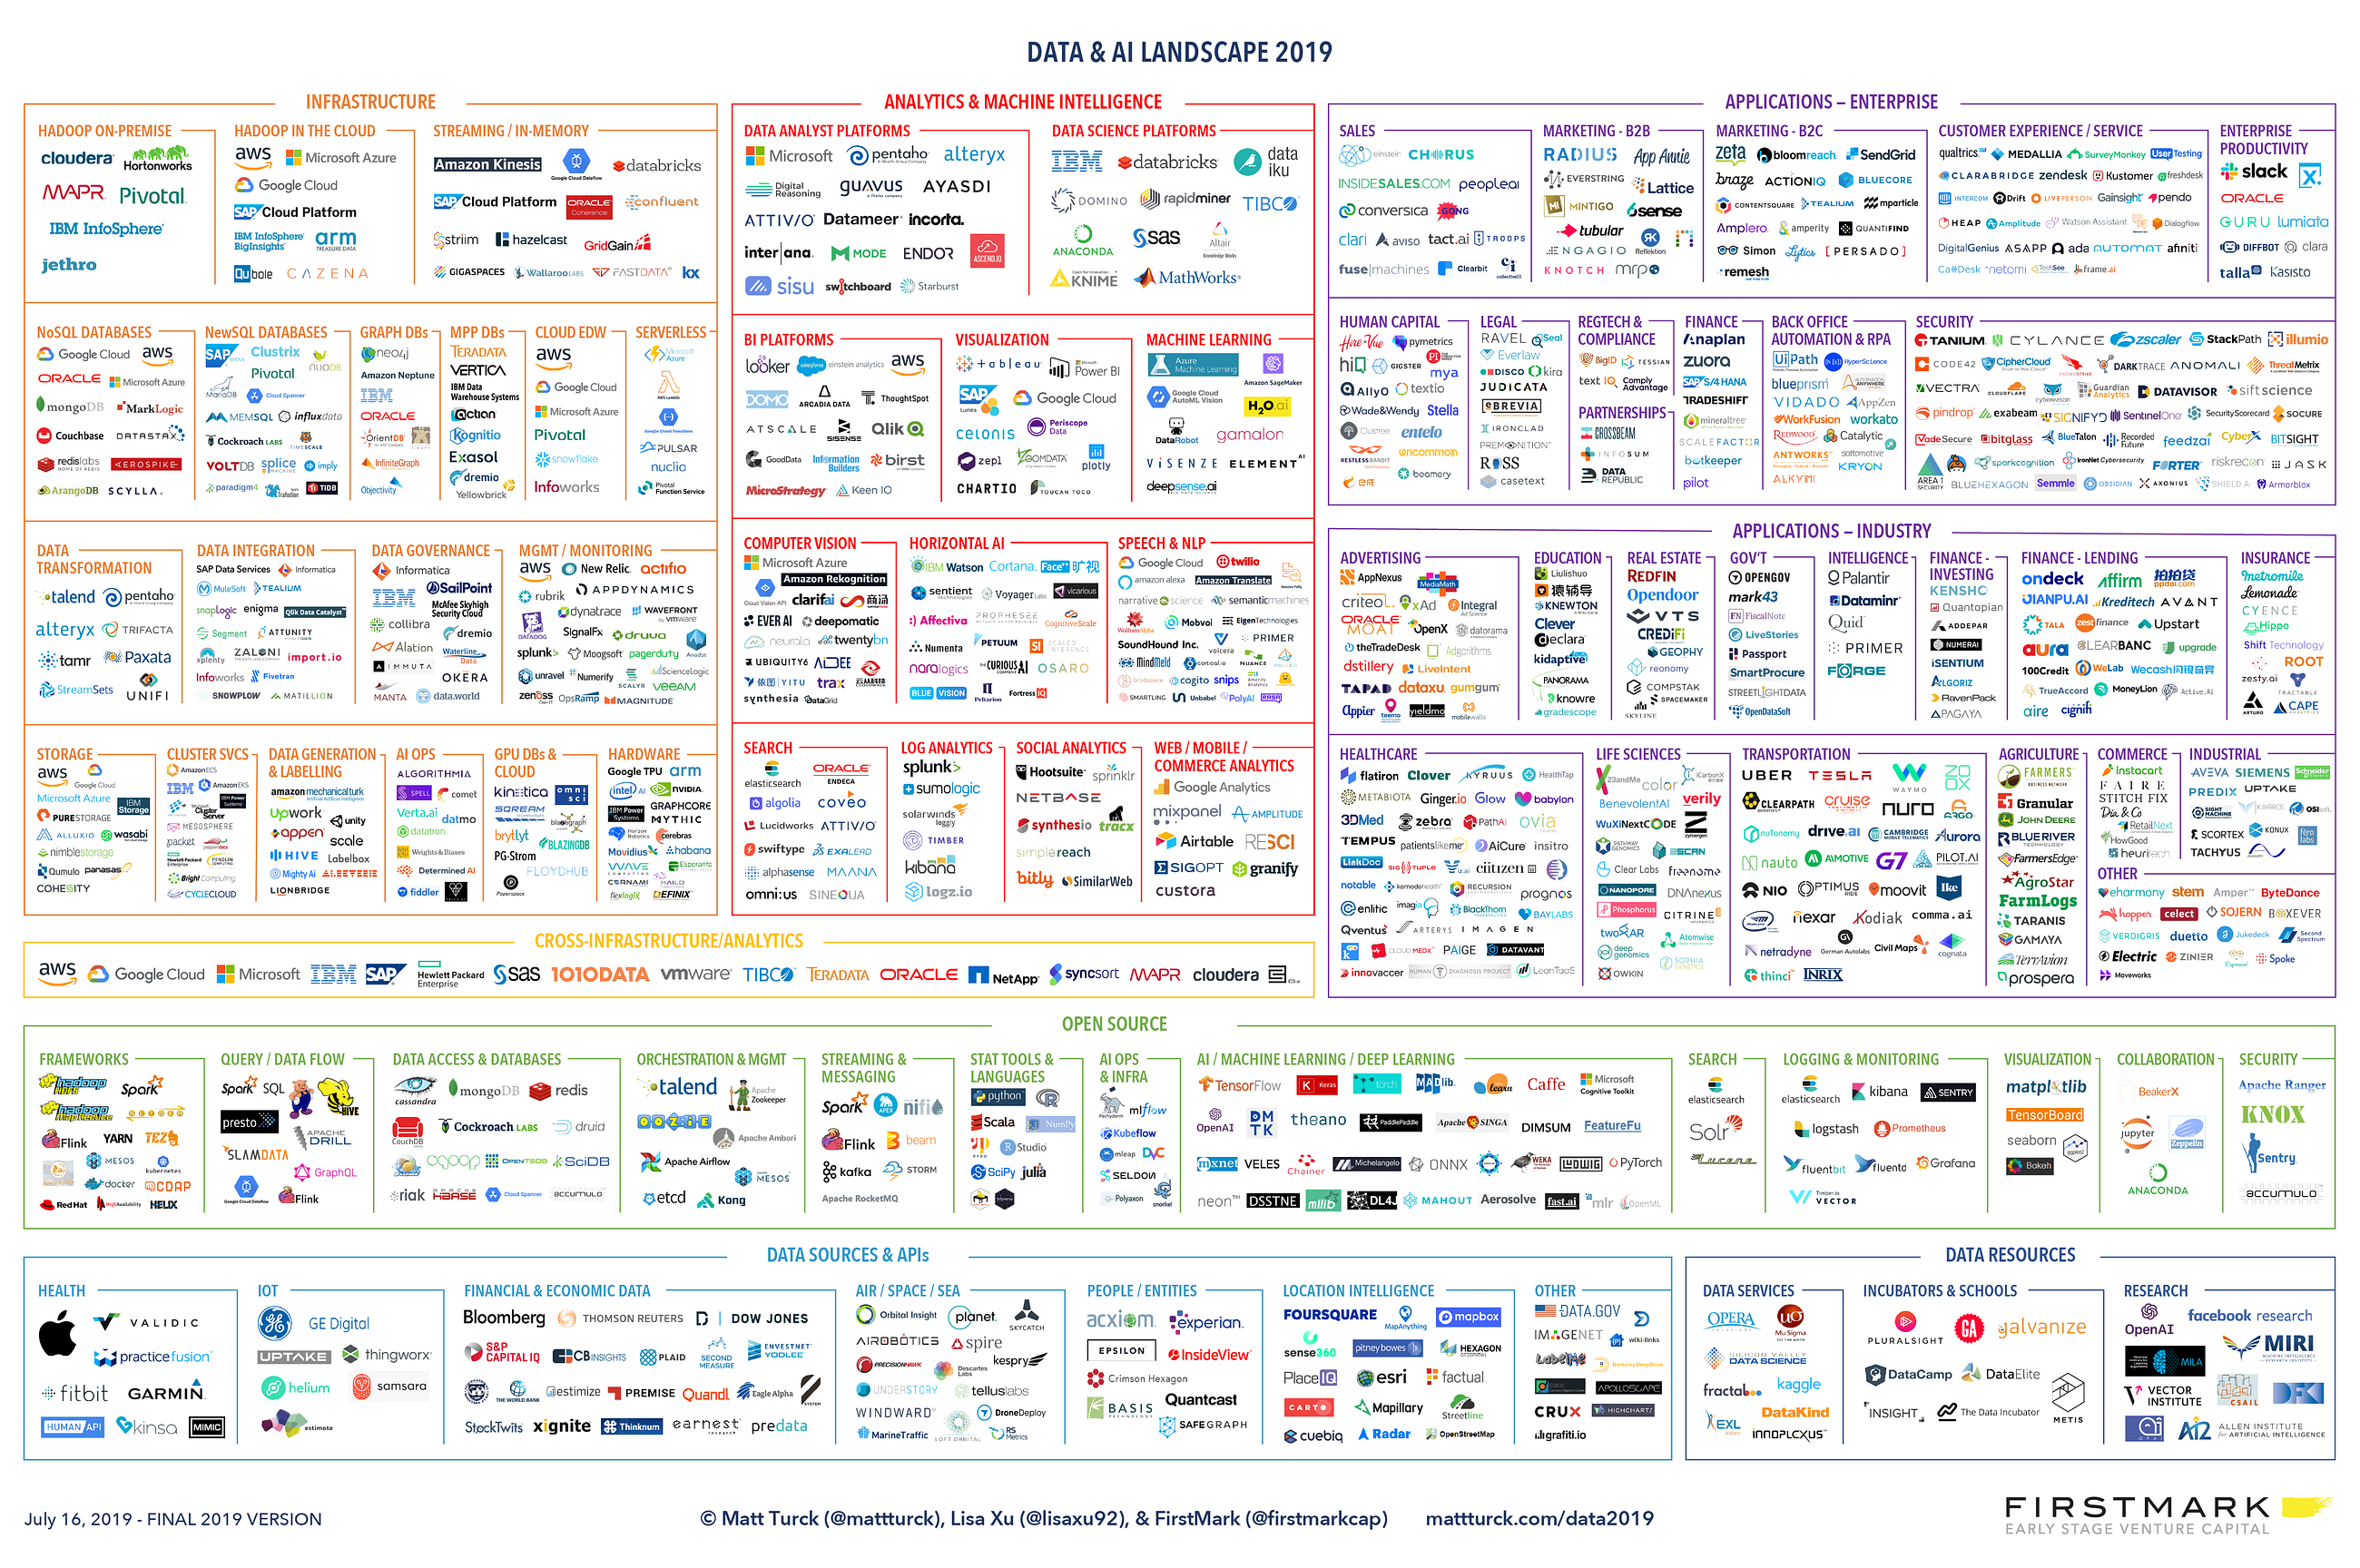 ML Tools: The Most Useful Machine Learning Tools 2020 | Experfy Insights